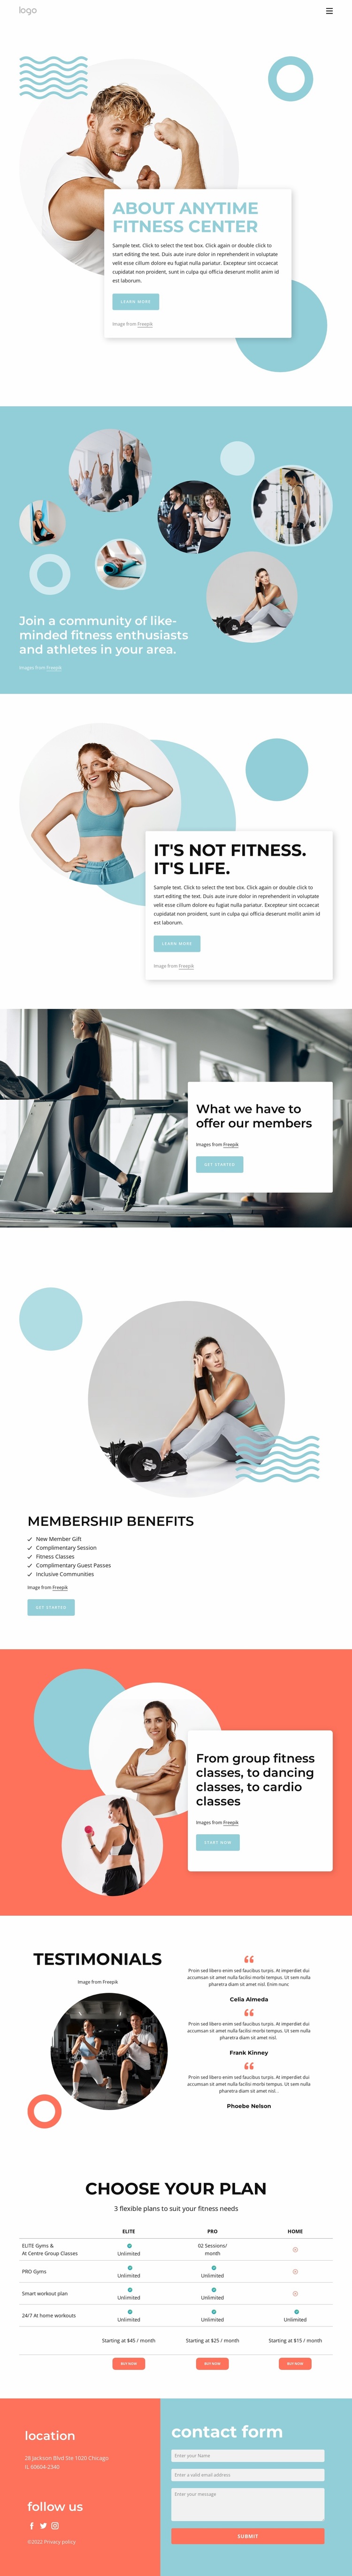 About Anytime fitness center Website Design